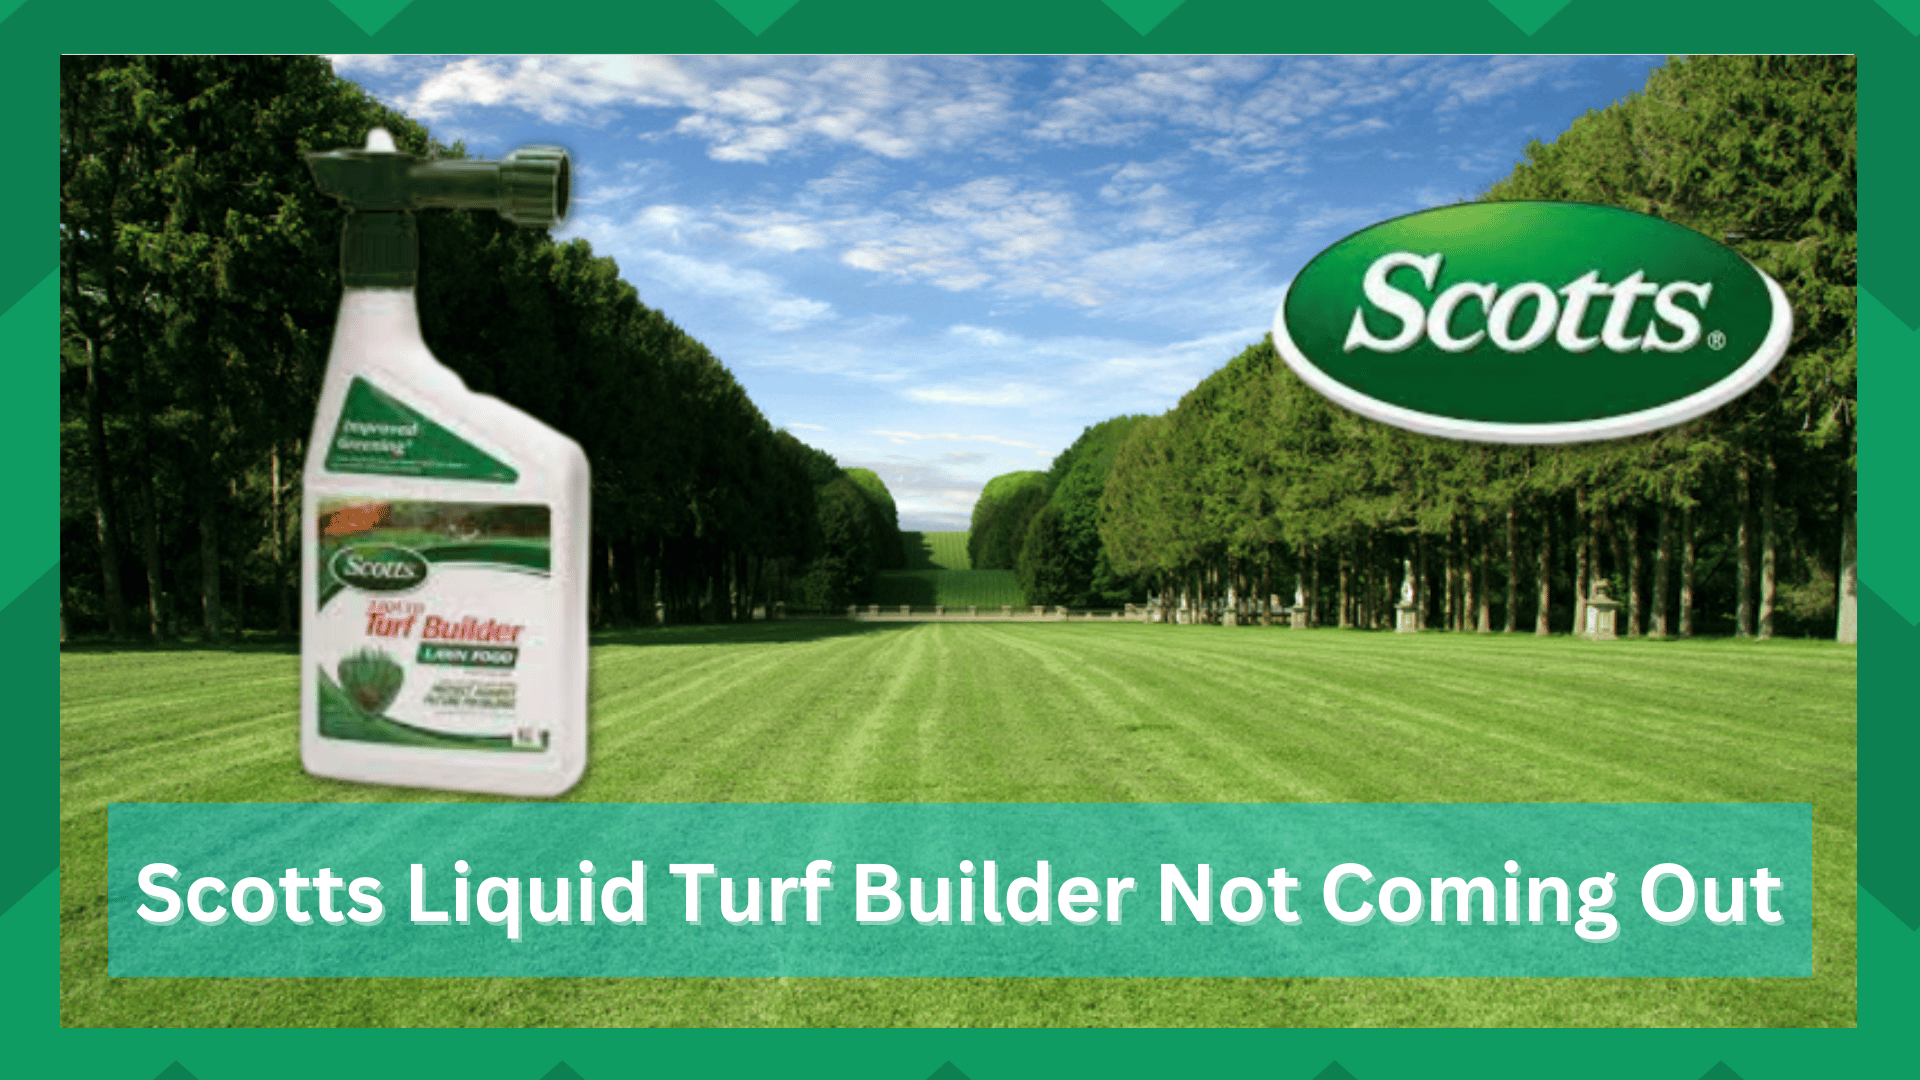 Scotts Liquid Turf Builder Not Coming Out